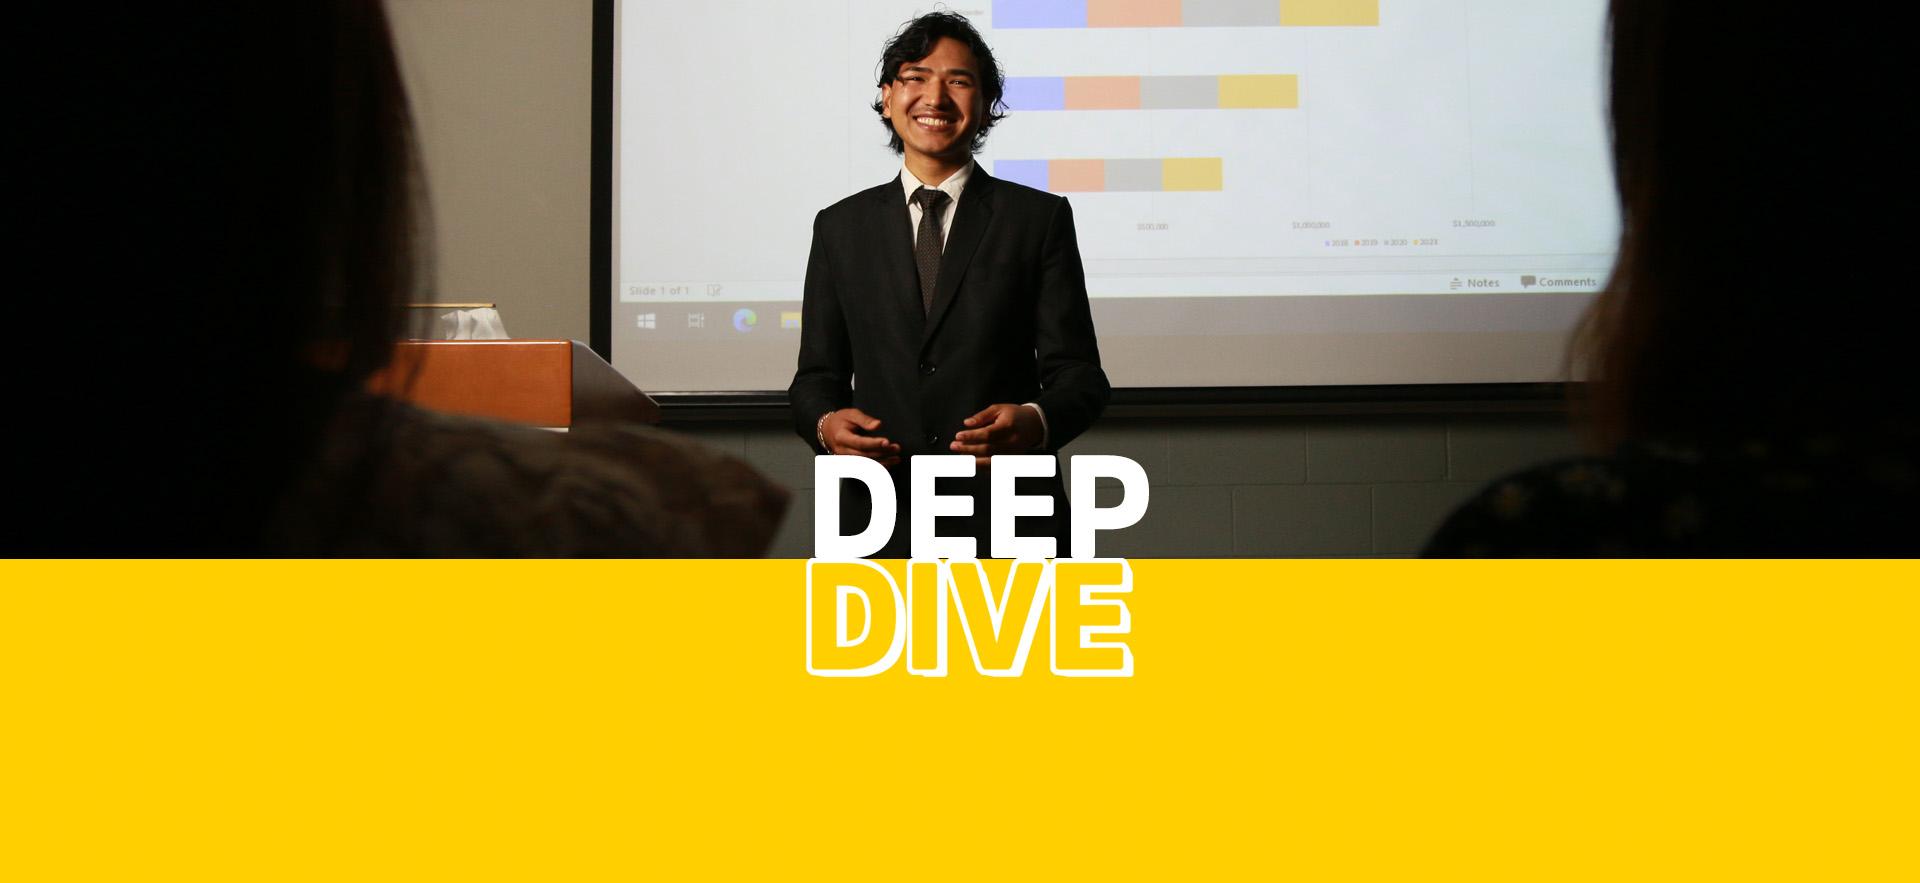 Deep Dive Business image with student in front of projector screen